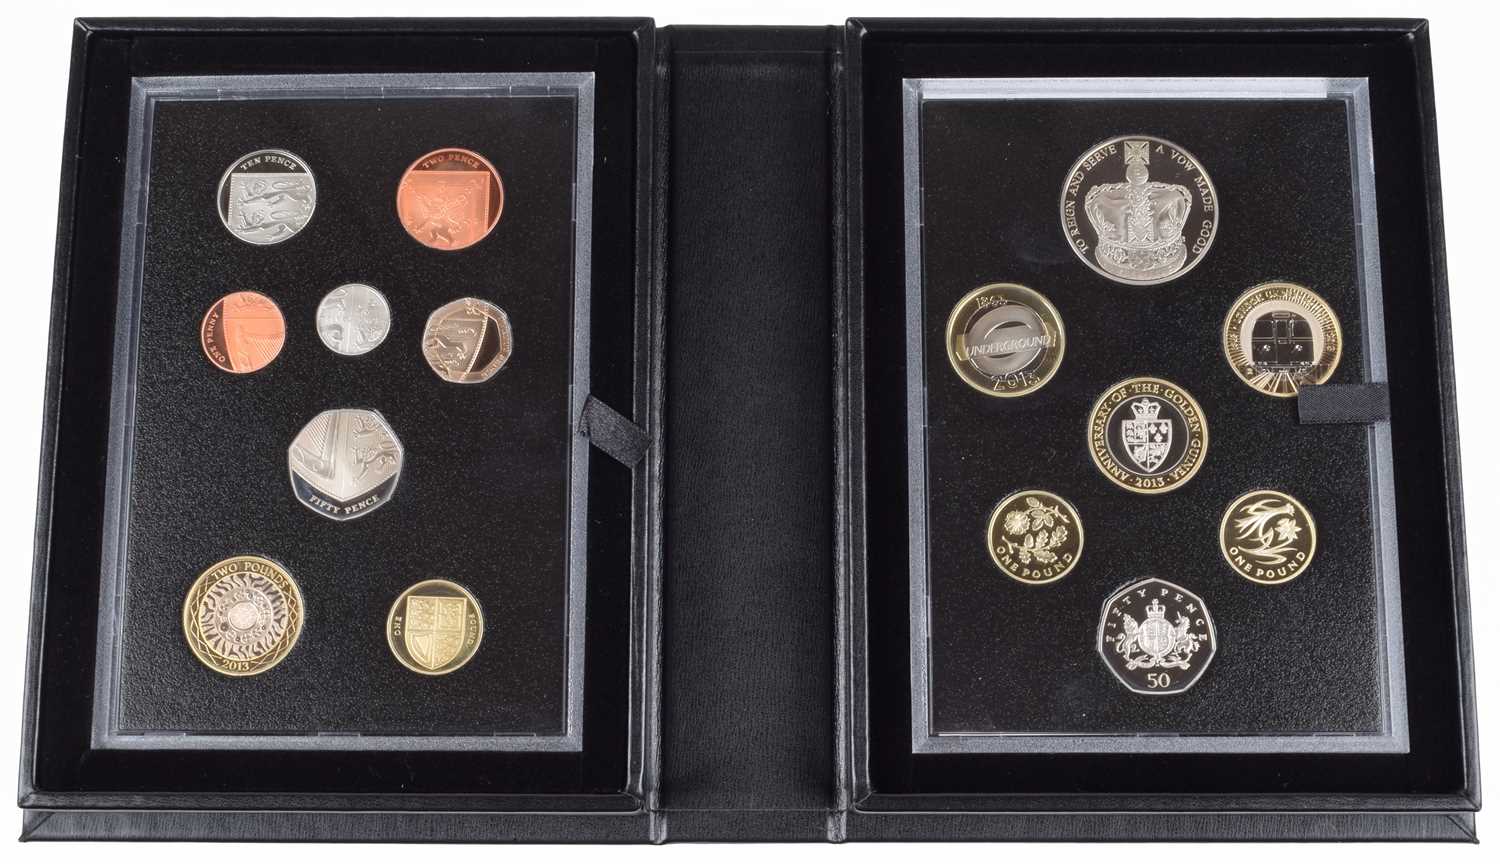 Lot 13 - The Royal Mint 2013 United Kingdom Proof Coin Set Collector Edition.